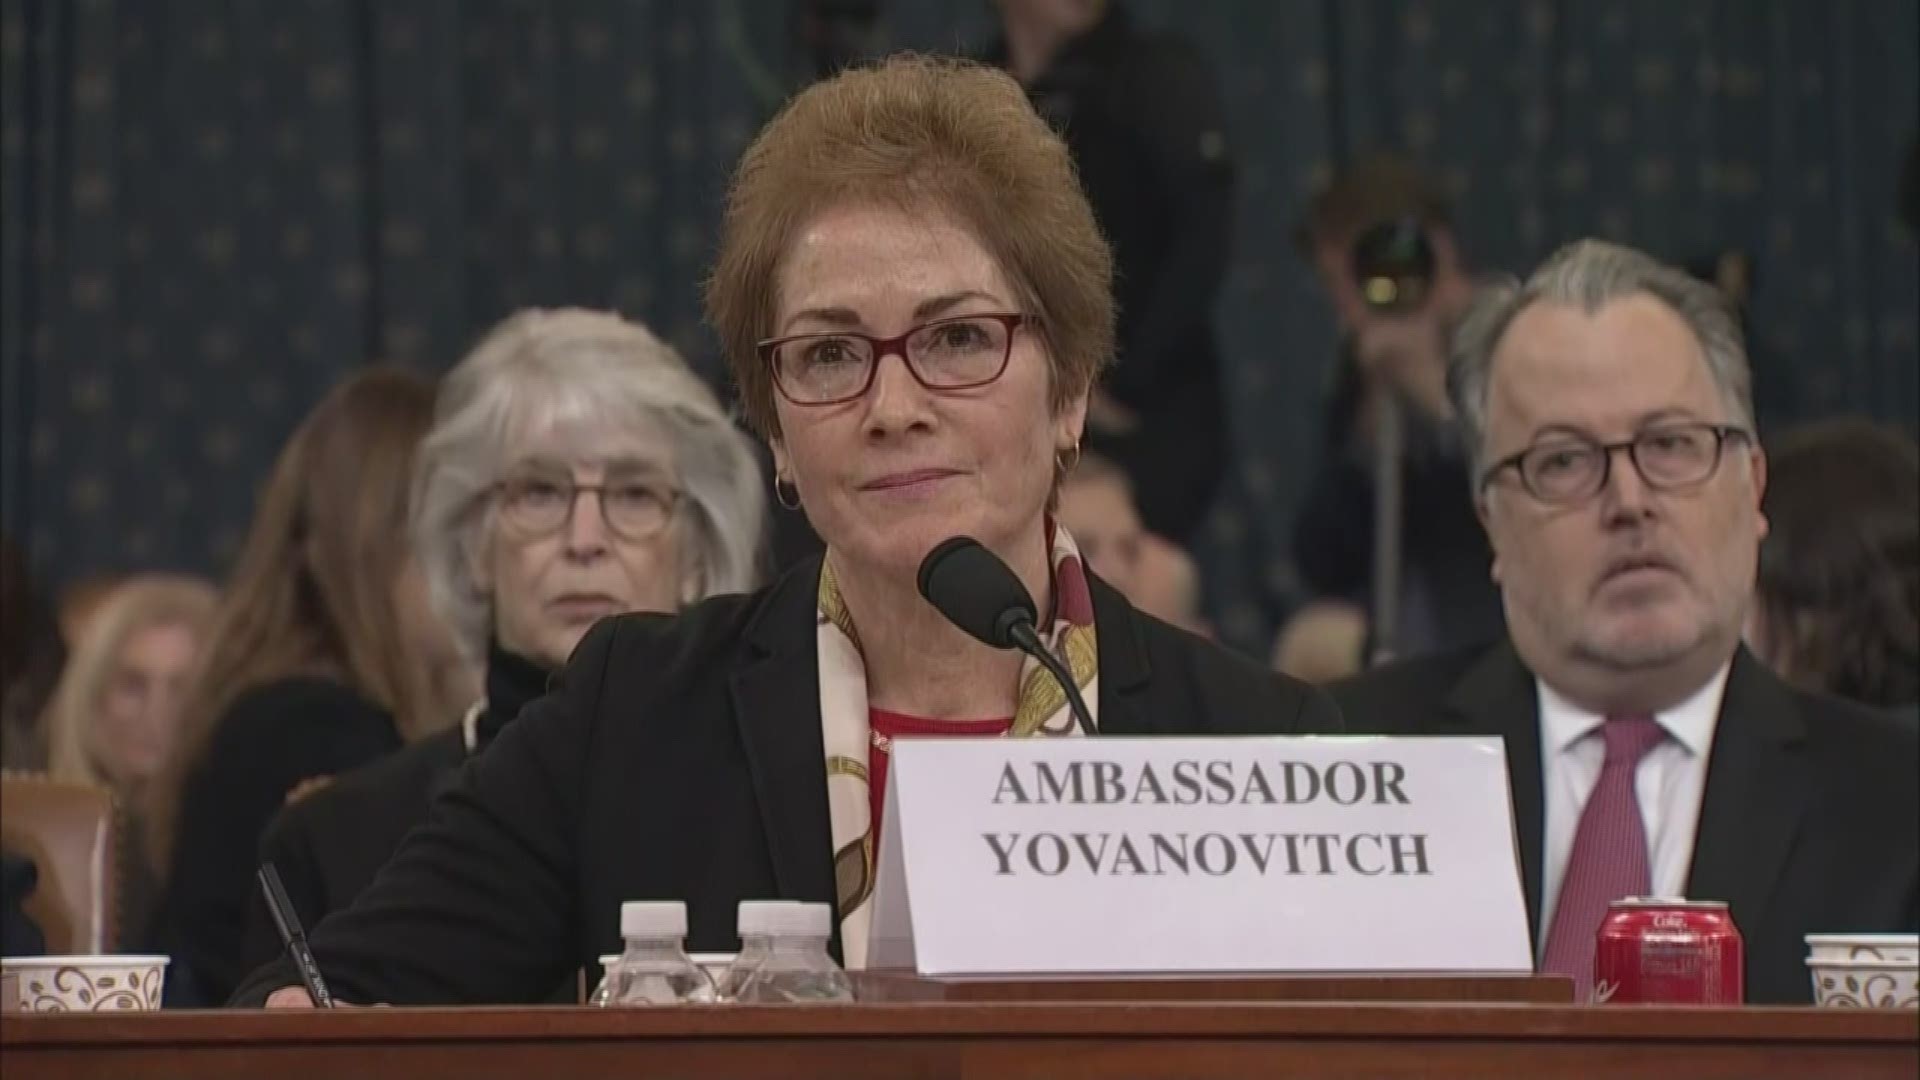 While former Ambassador to Ukraine Marie Yovanovitch testified Friday in the impeachment inquiry, President Trump tweeted that 'everywhere' she went 'turned bad.'